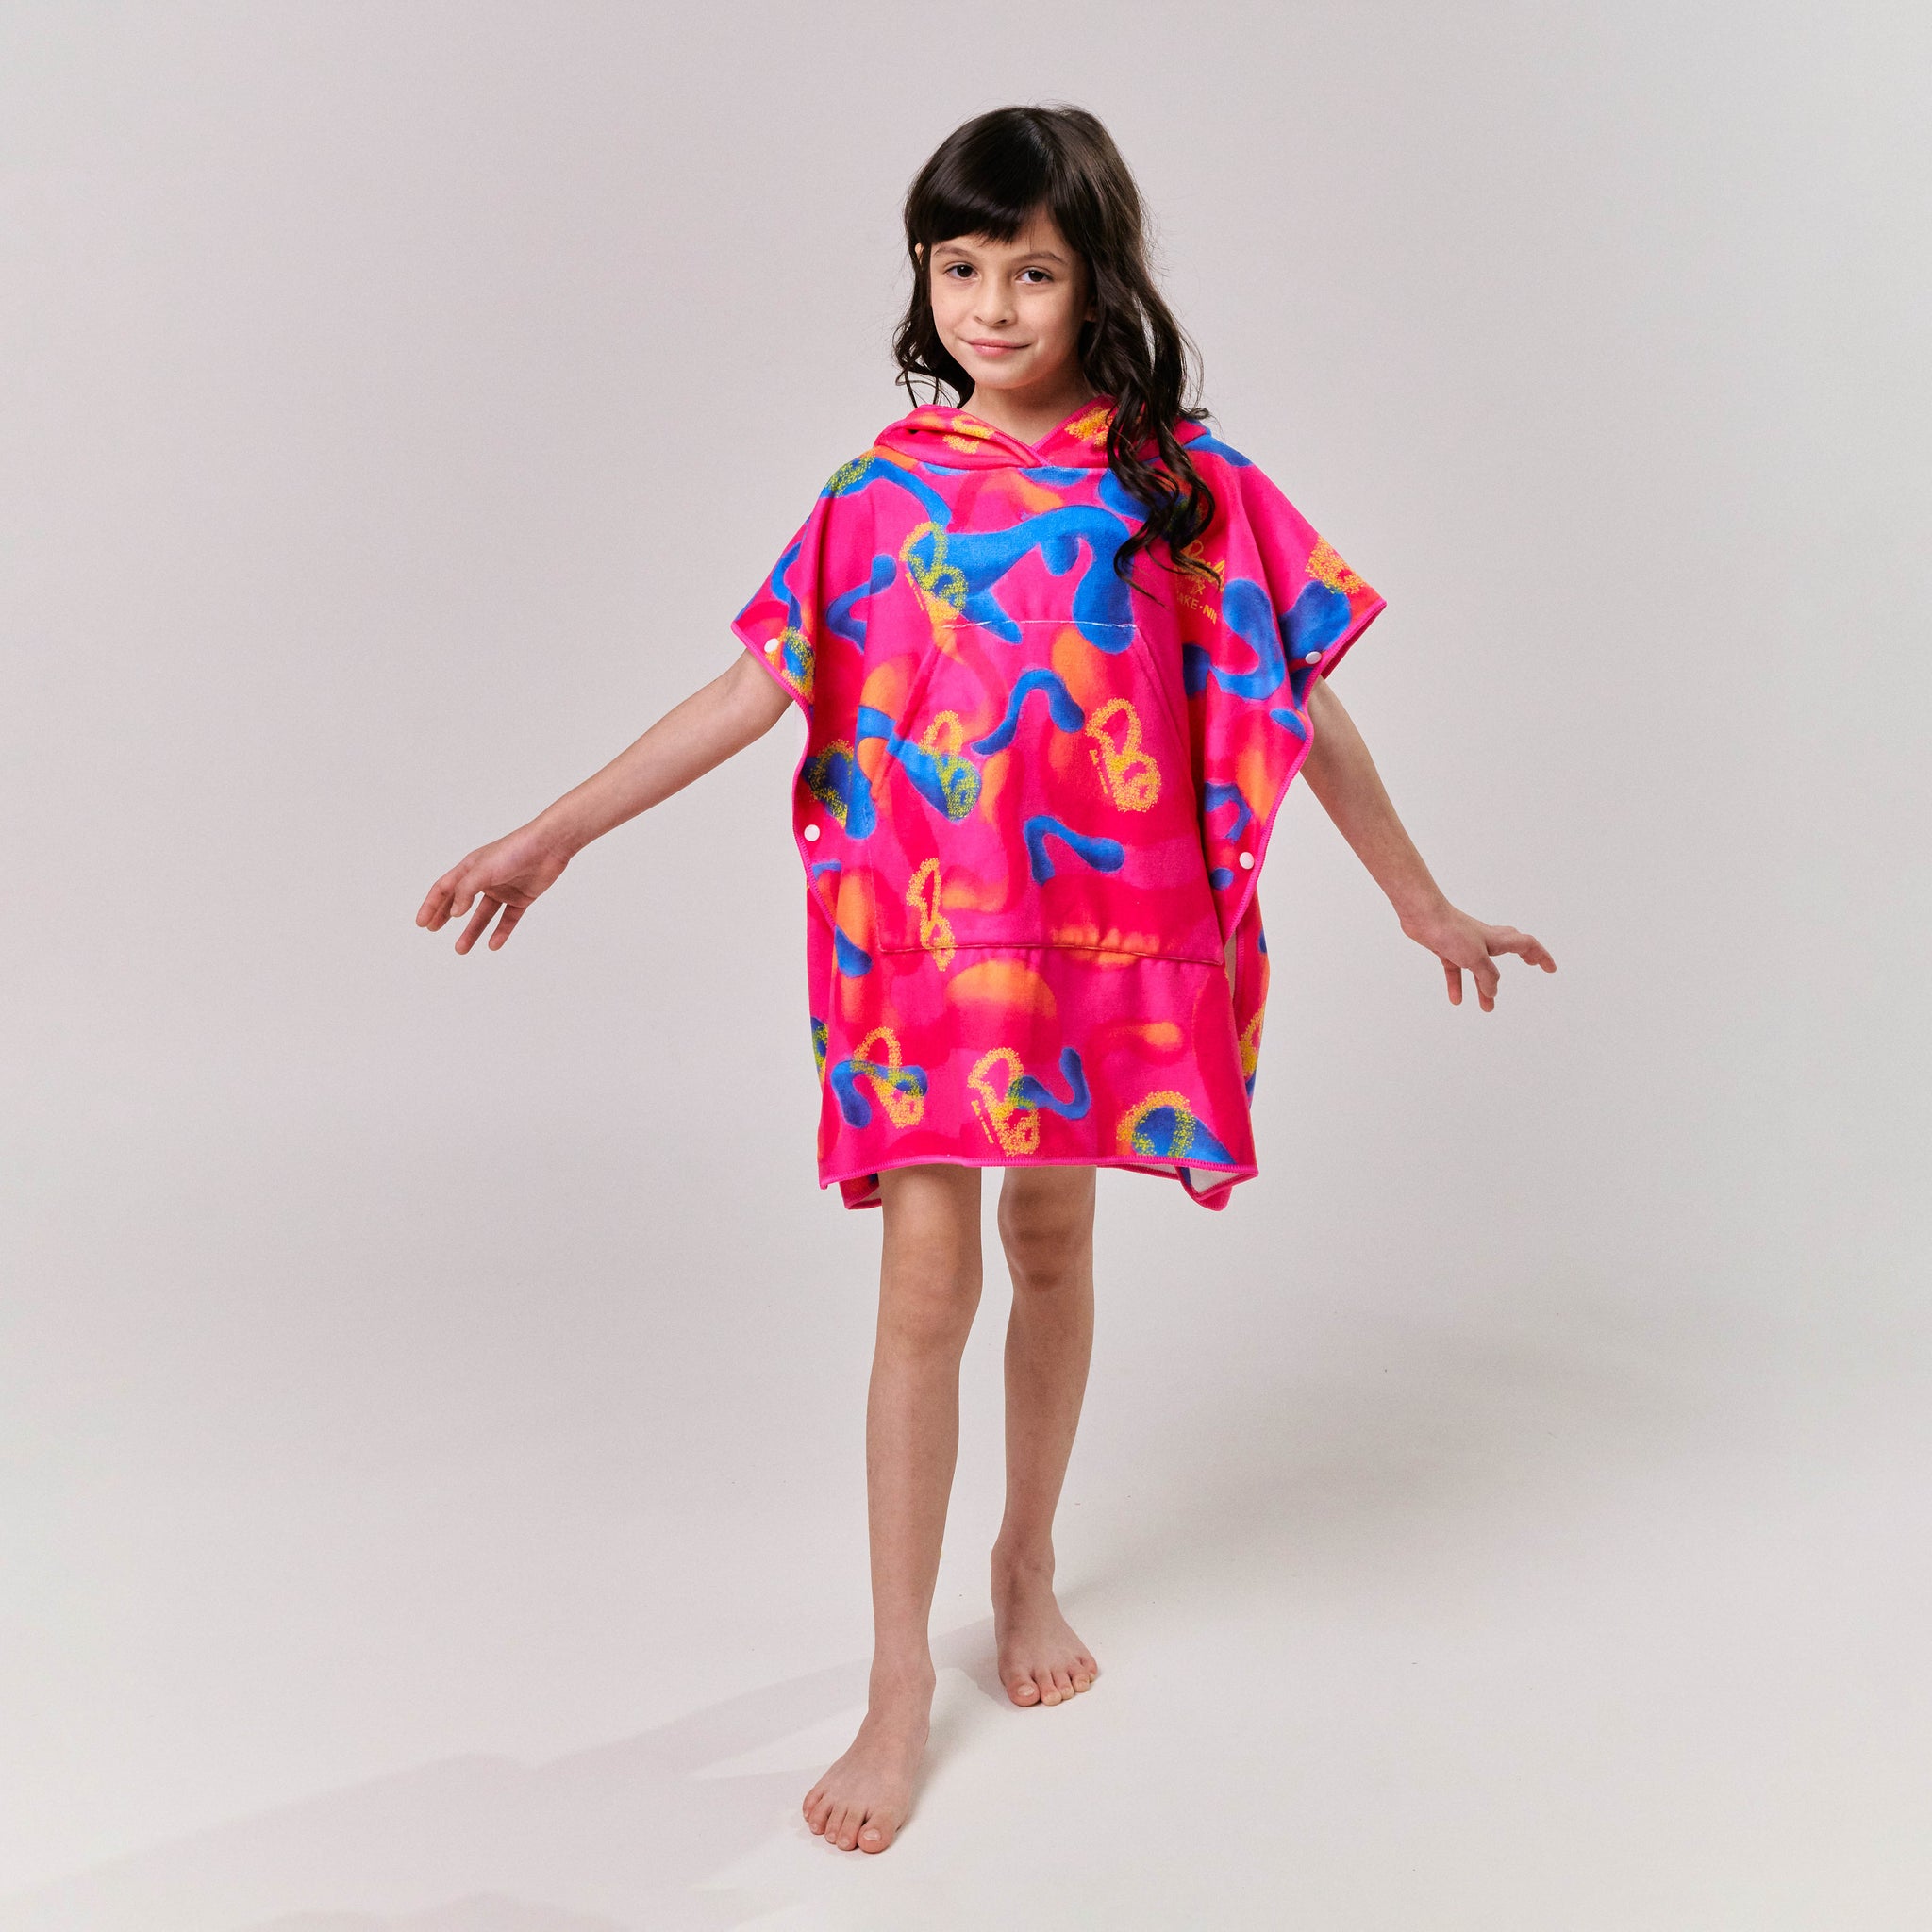 PONCHO KIDS TOWEL MELODY IN HOT PINK